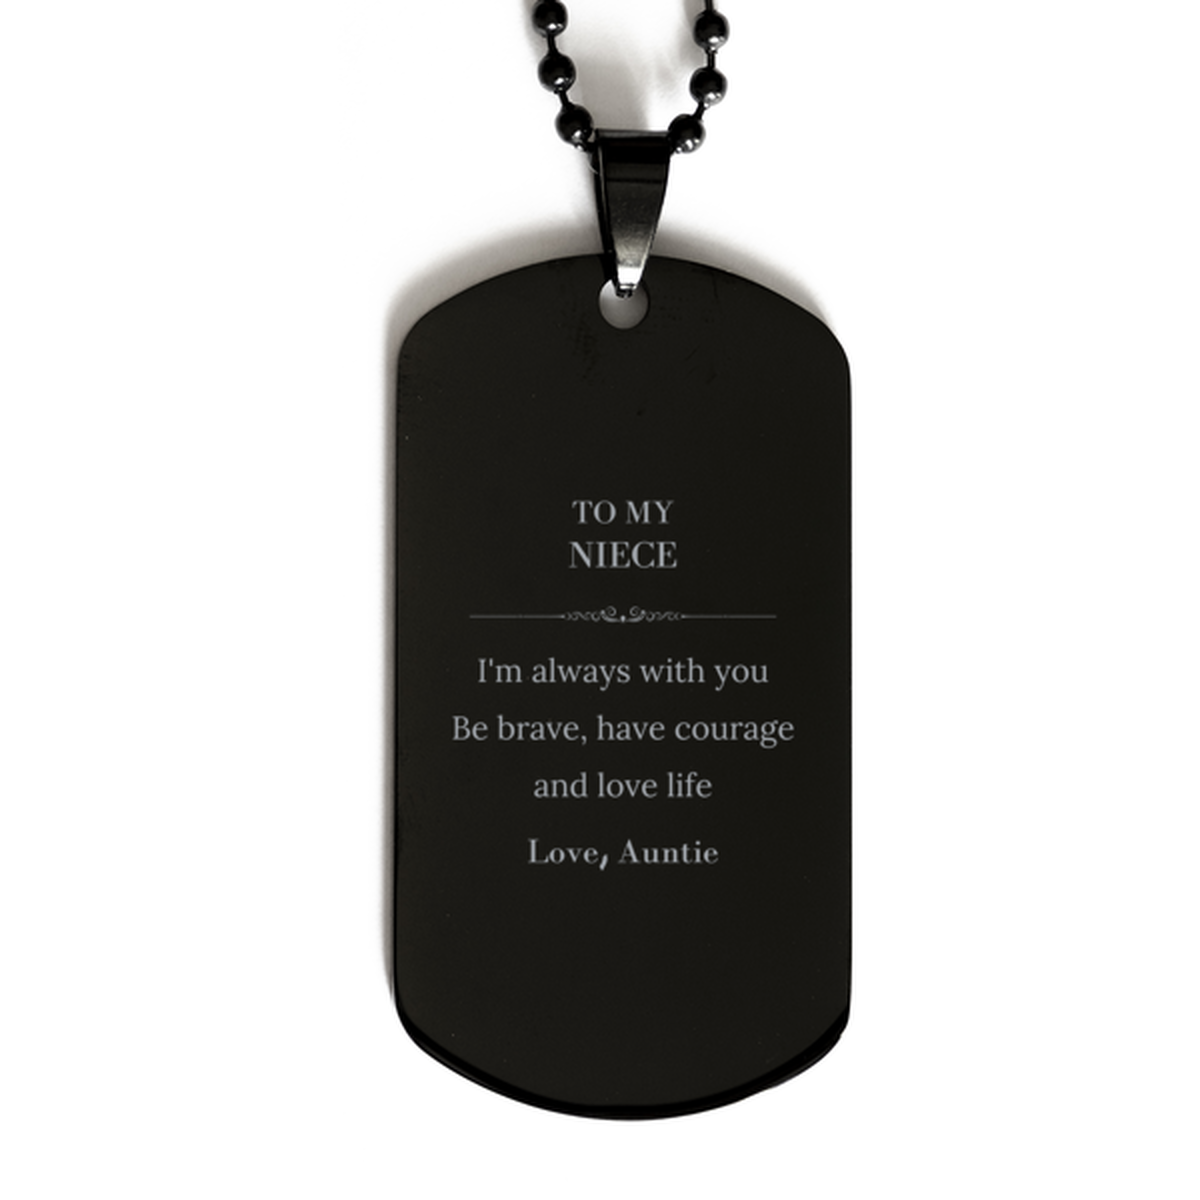 To My Niece Gifts from Auntie, Unique Black Dog Tag Inspirational Christmas Birthday Graduation Gifts for Niece I'm always with you. Be brave, have courage and love life. Love, Auntie